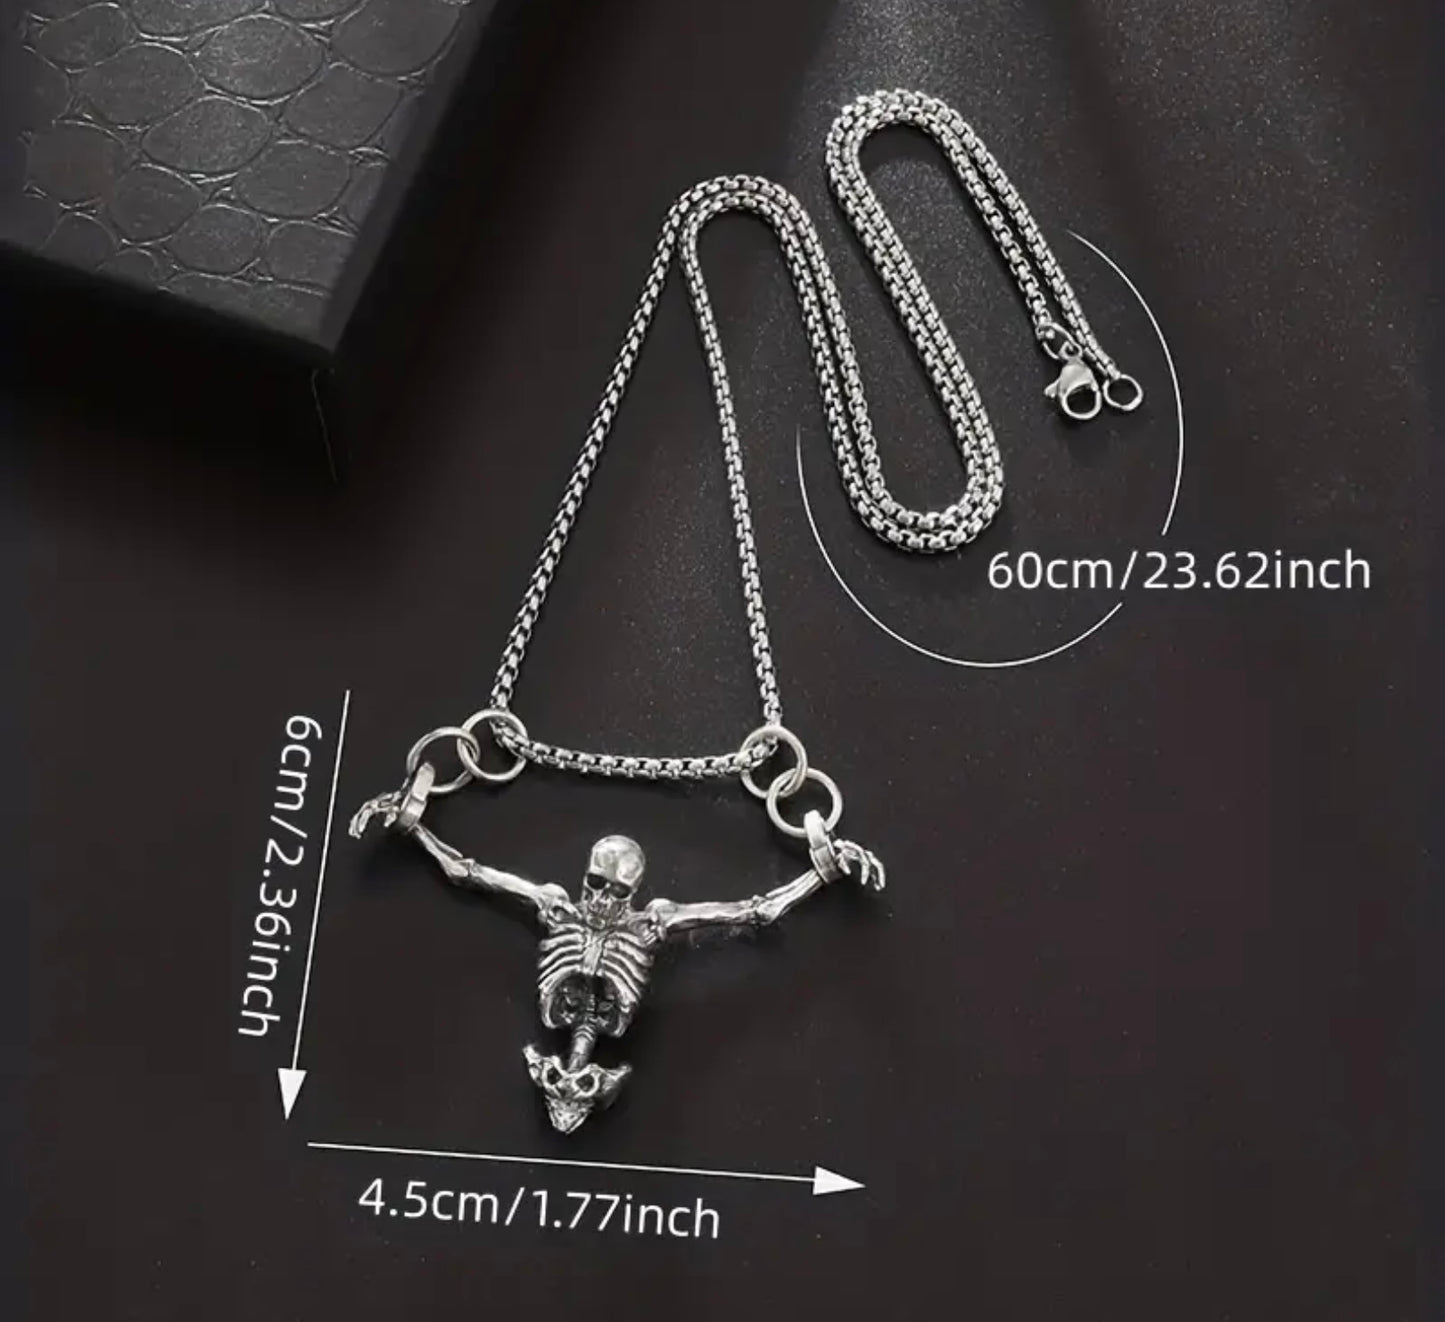 Pirate hanging necklace